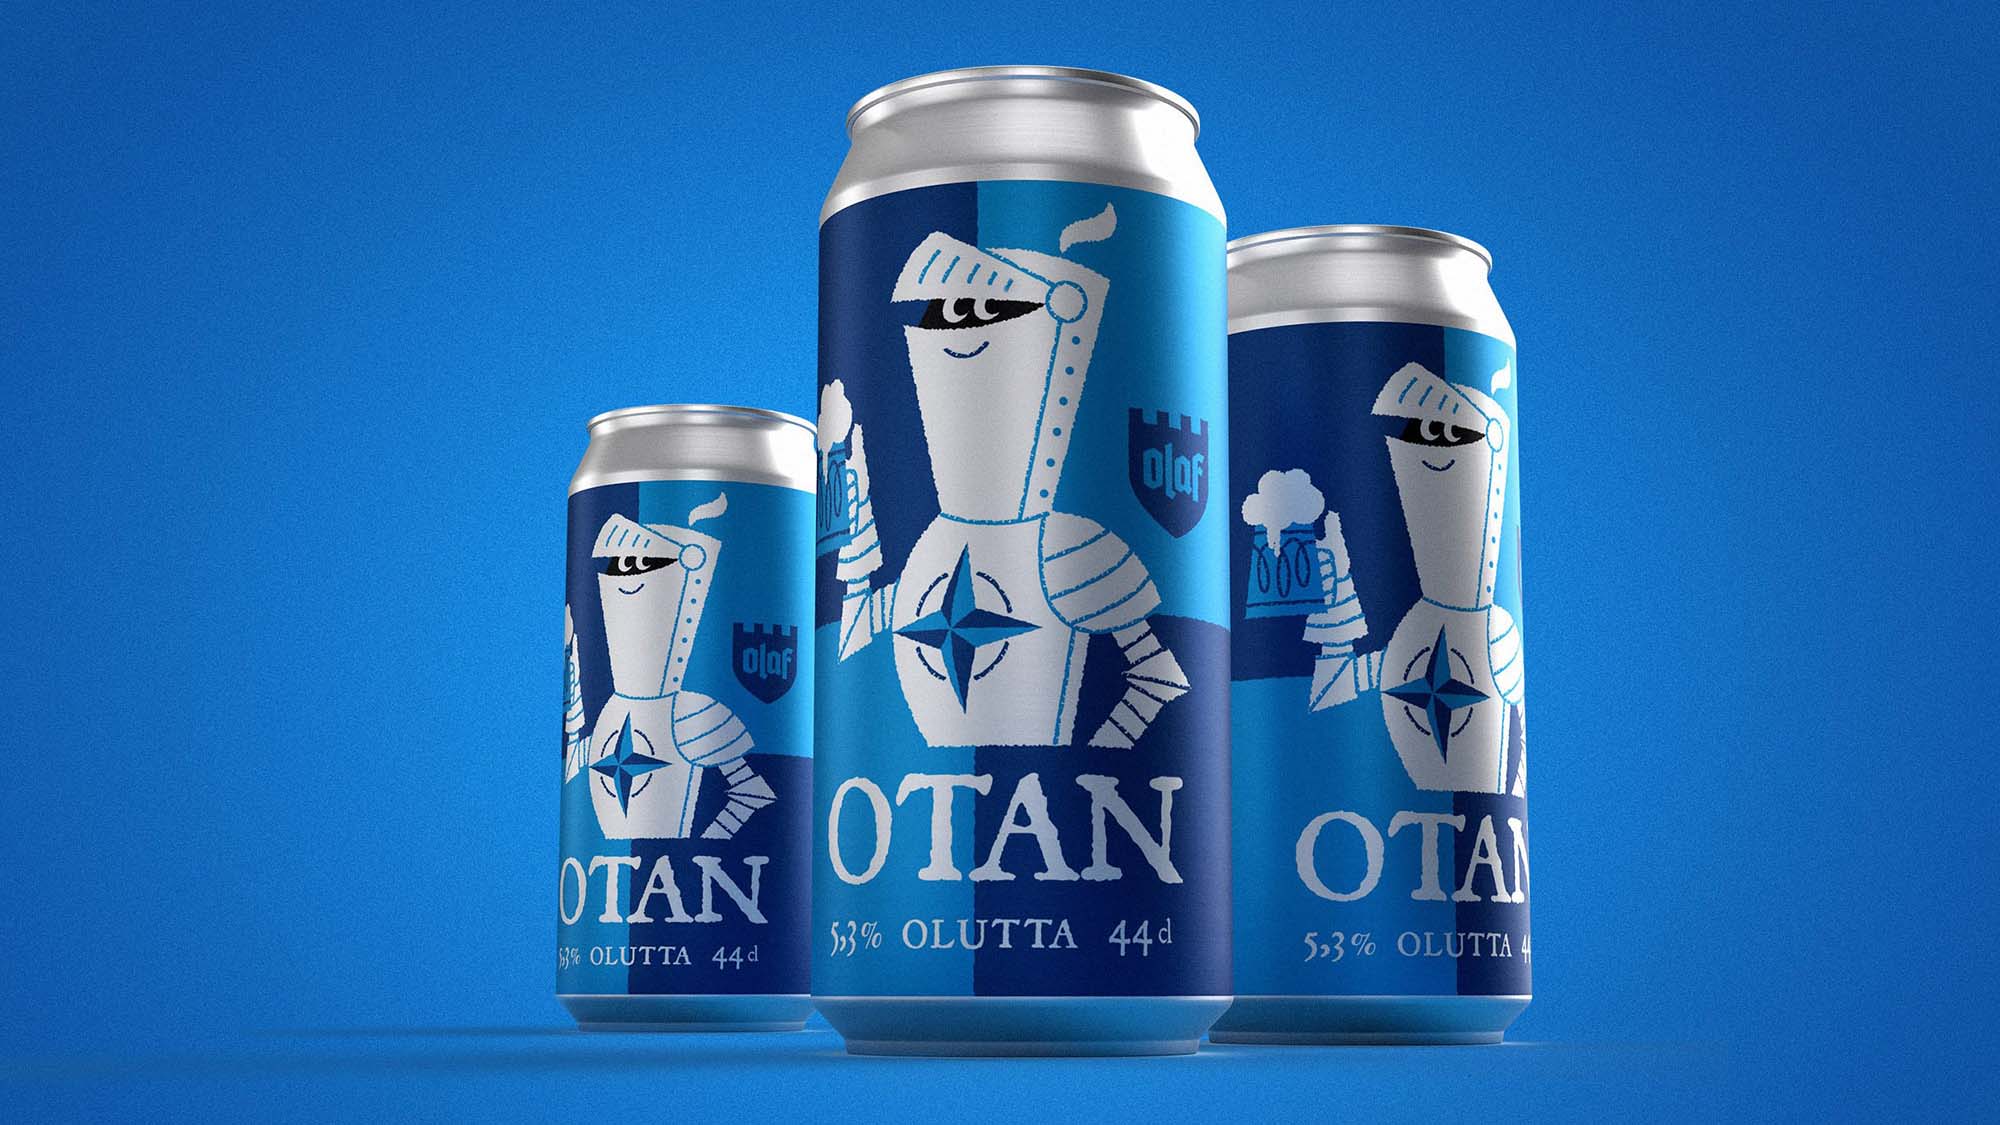 Read more about the article Finnish Brewery Fires Broadside At Putin With New NATO Beer